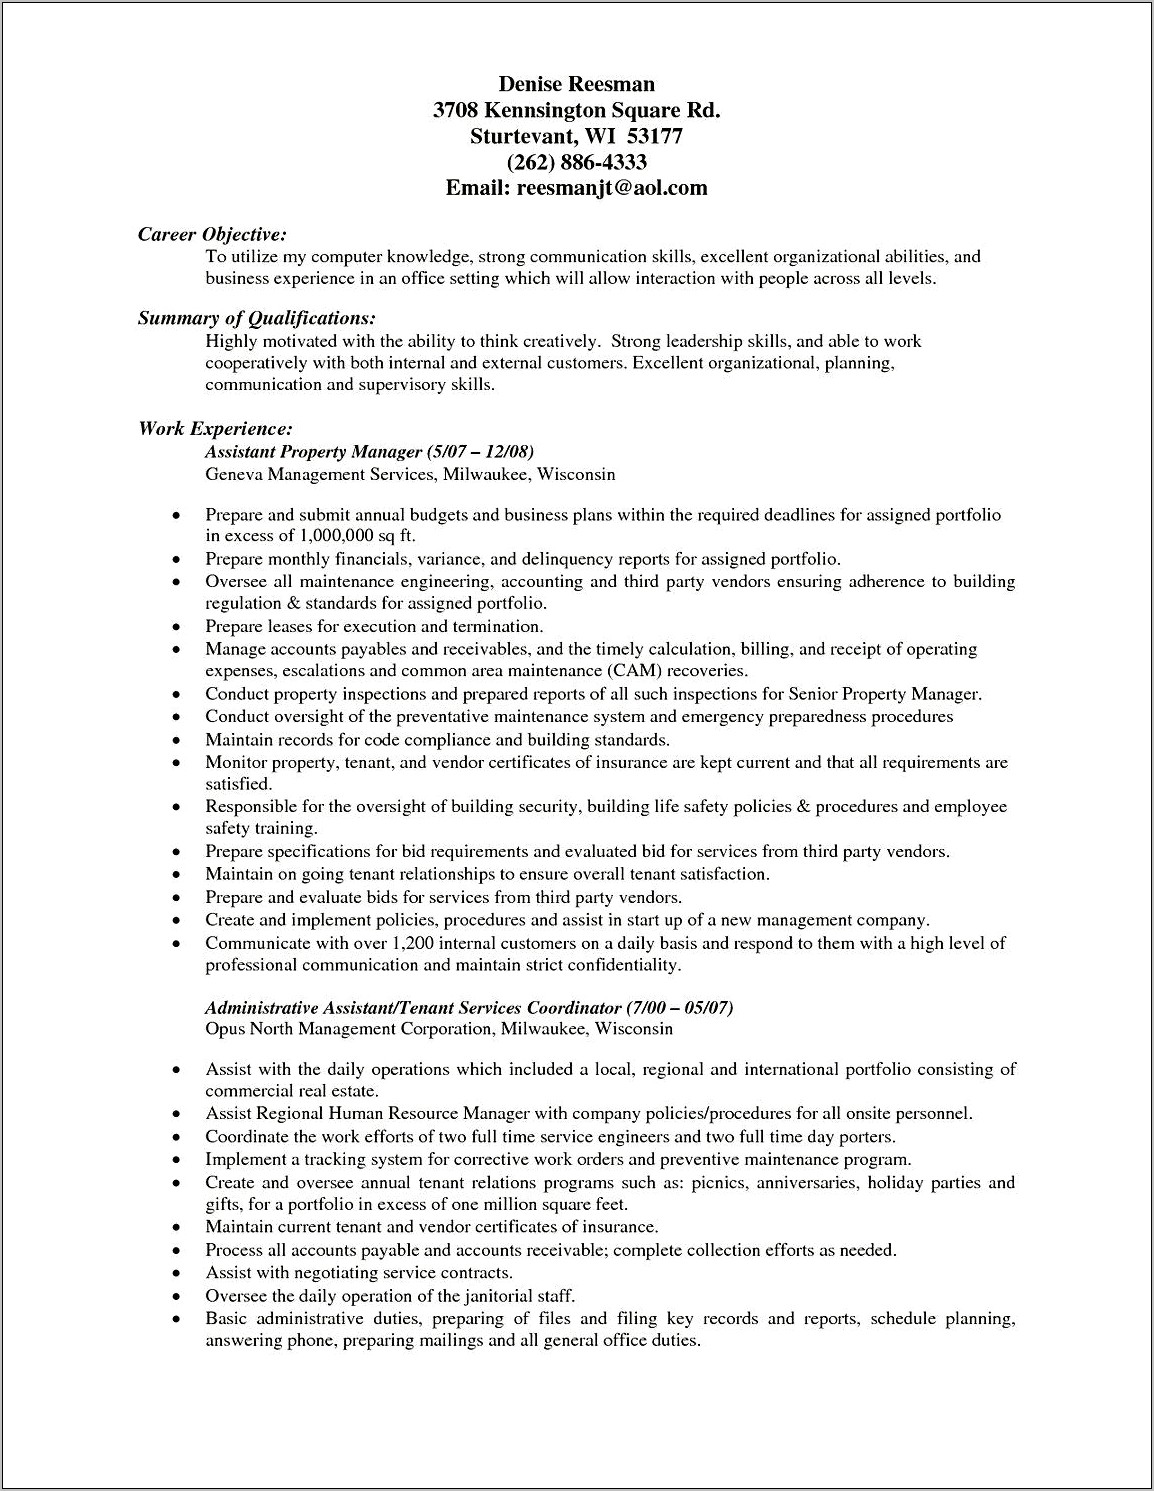 Residential Property Management Assistant Property Manager Resume